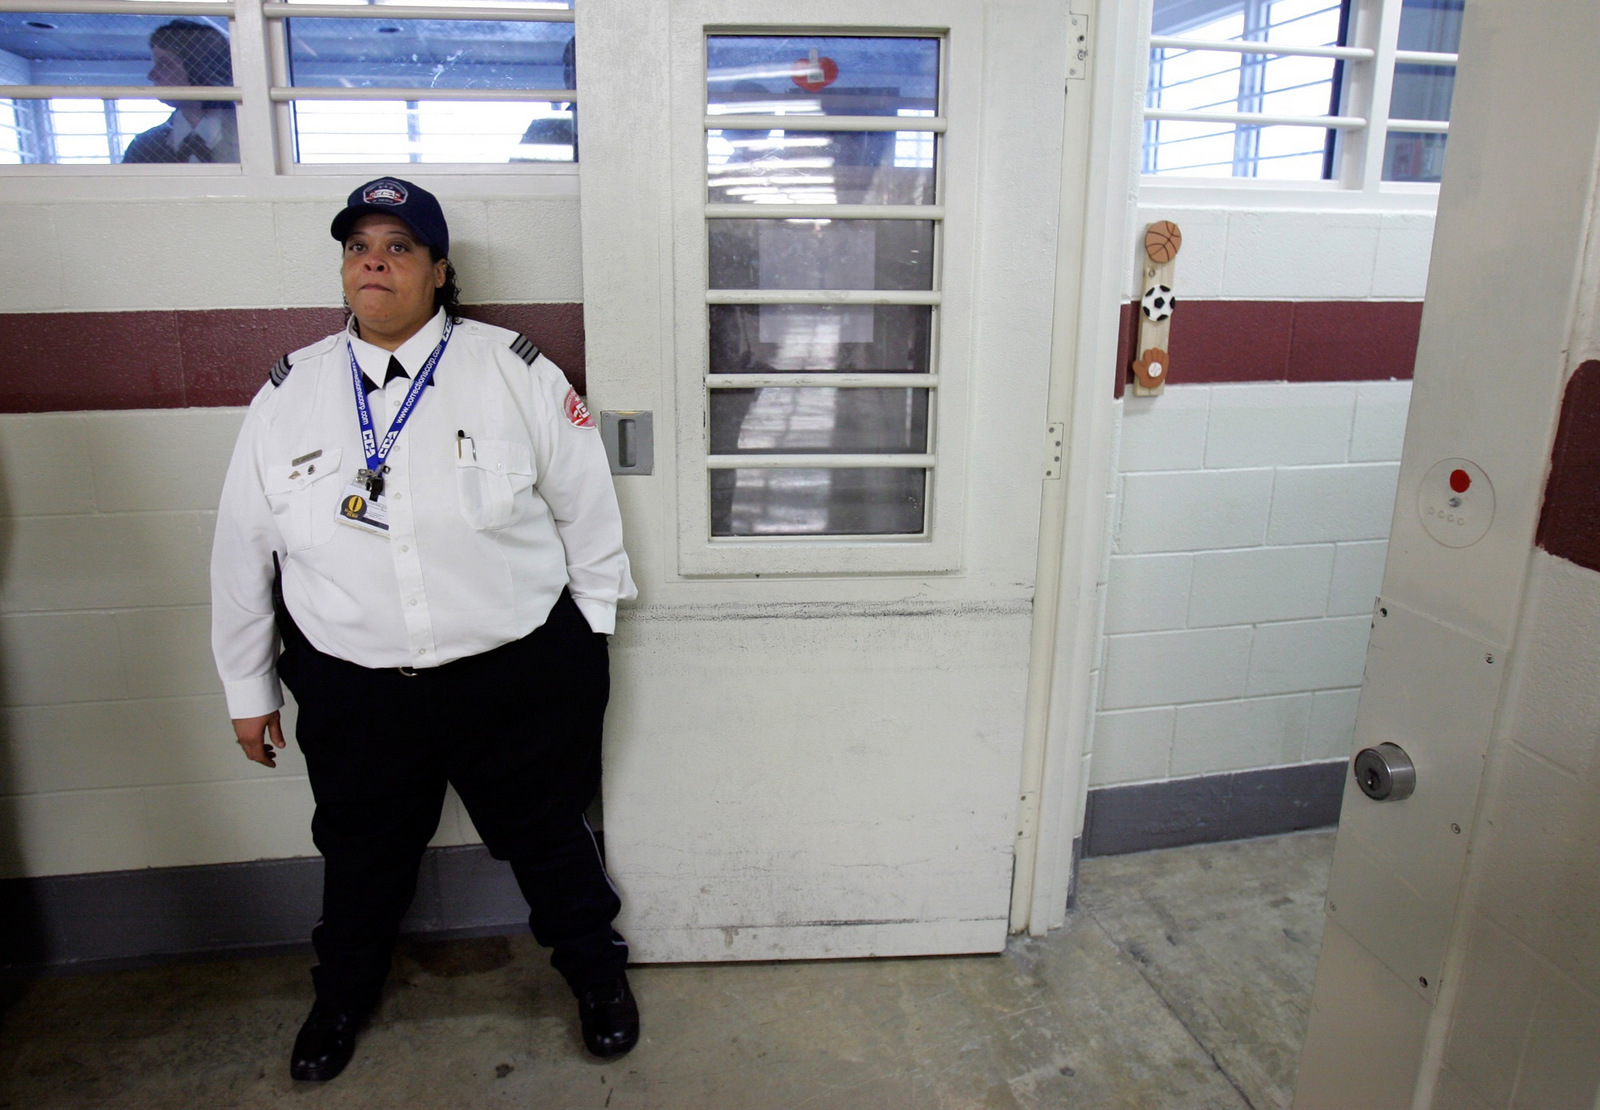 A guard holds open a door during a media tour of the T. Don Hutto Residential Center in Taylor, Texas, Friday, Feb. 9, 2007. LM Otero | AP